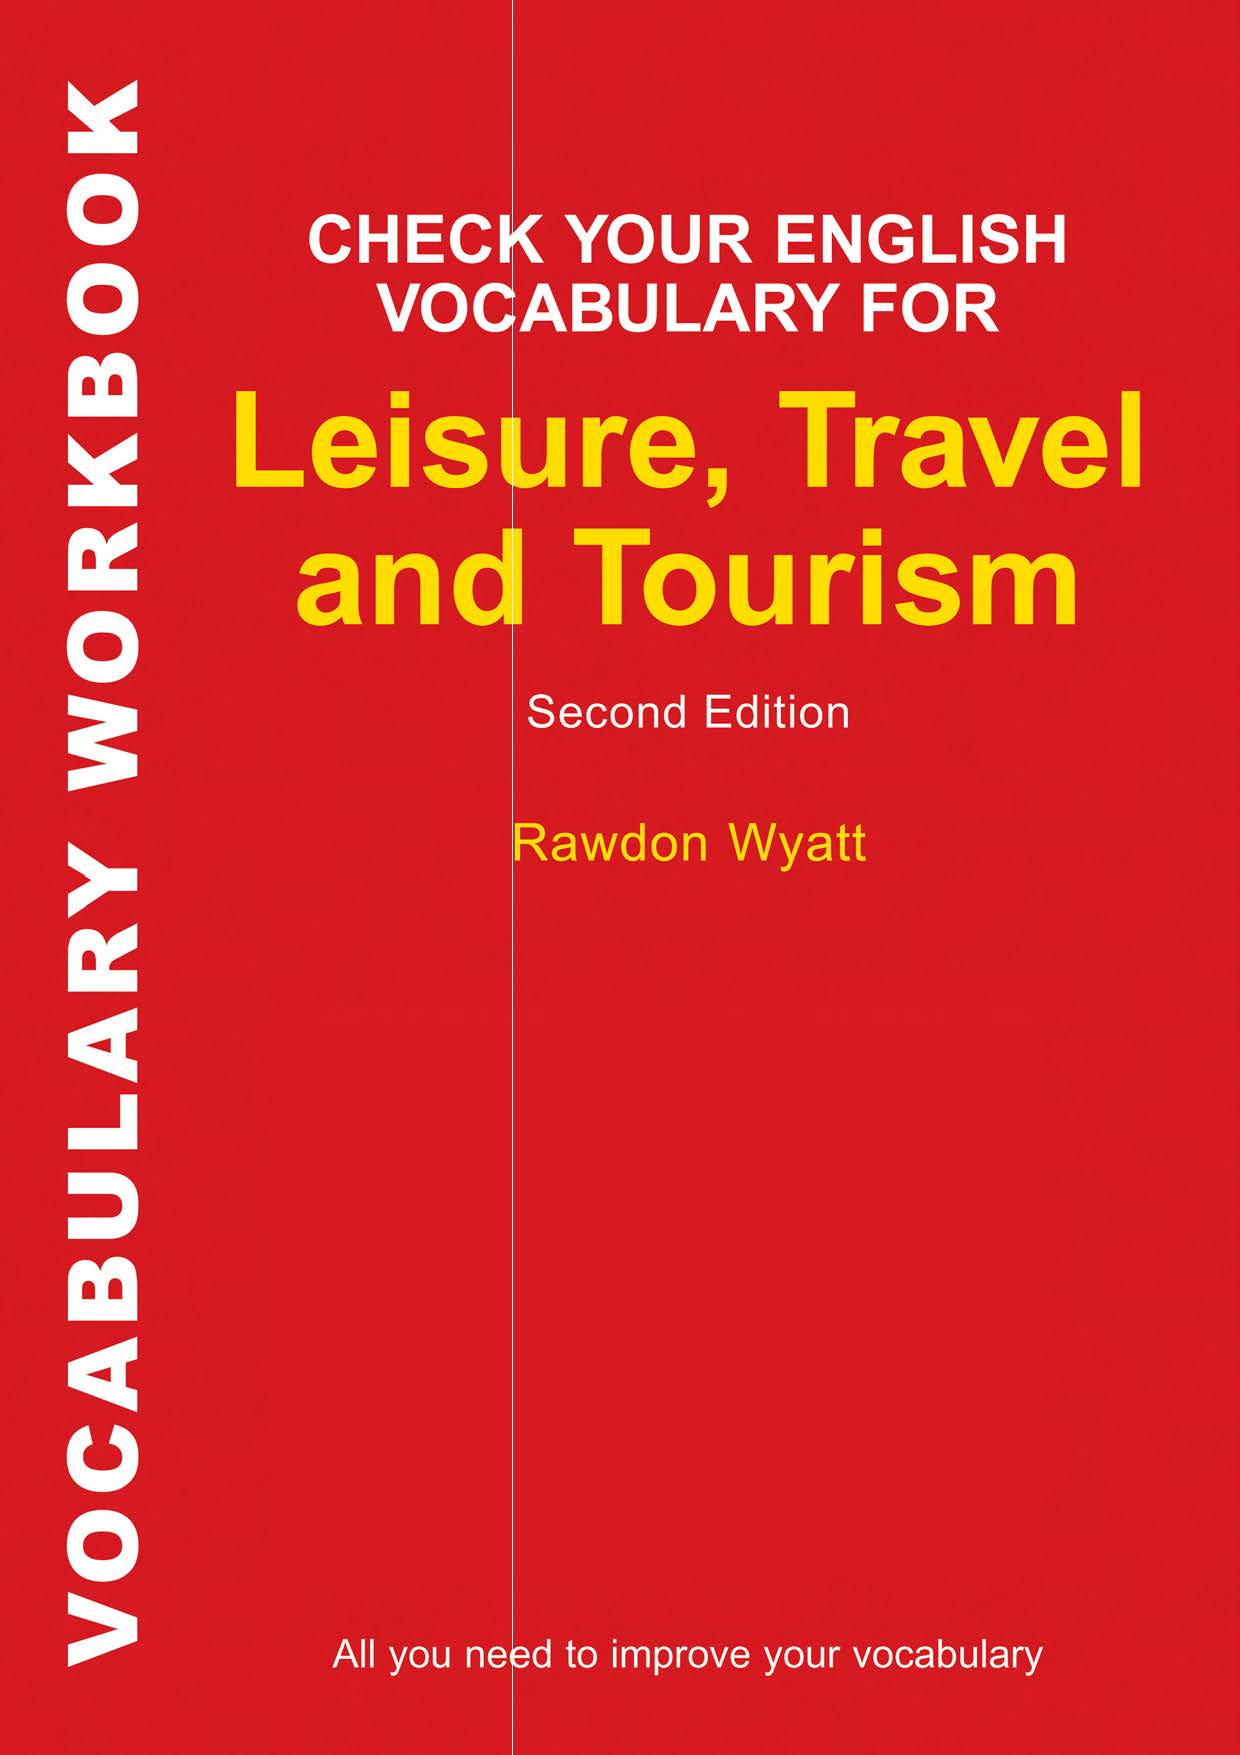 Check your vocabulary for Leisure, Travel, and Tourism by Rawdon Wyatt